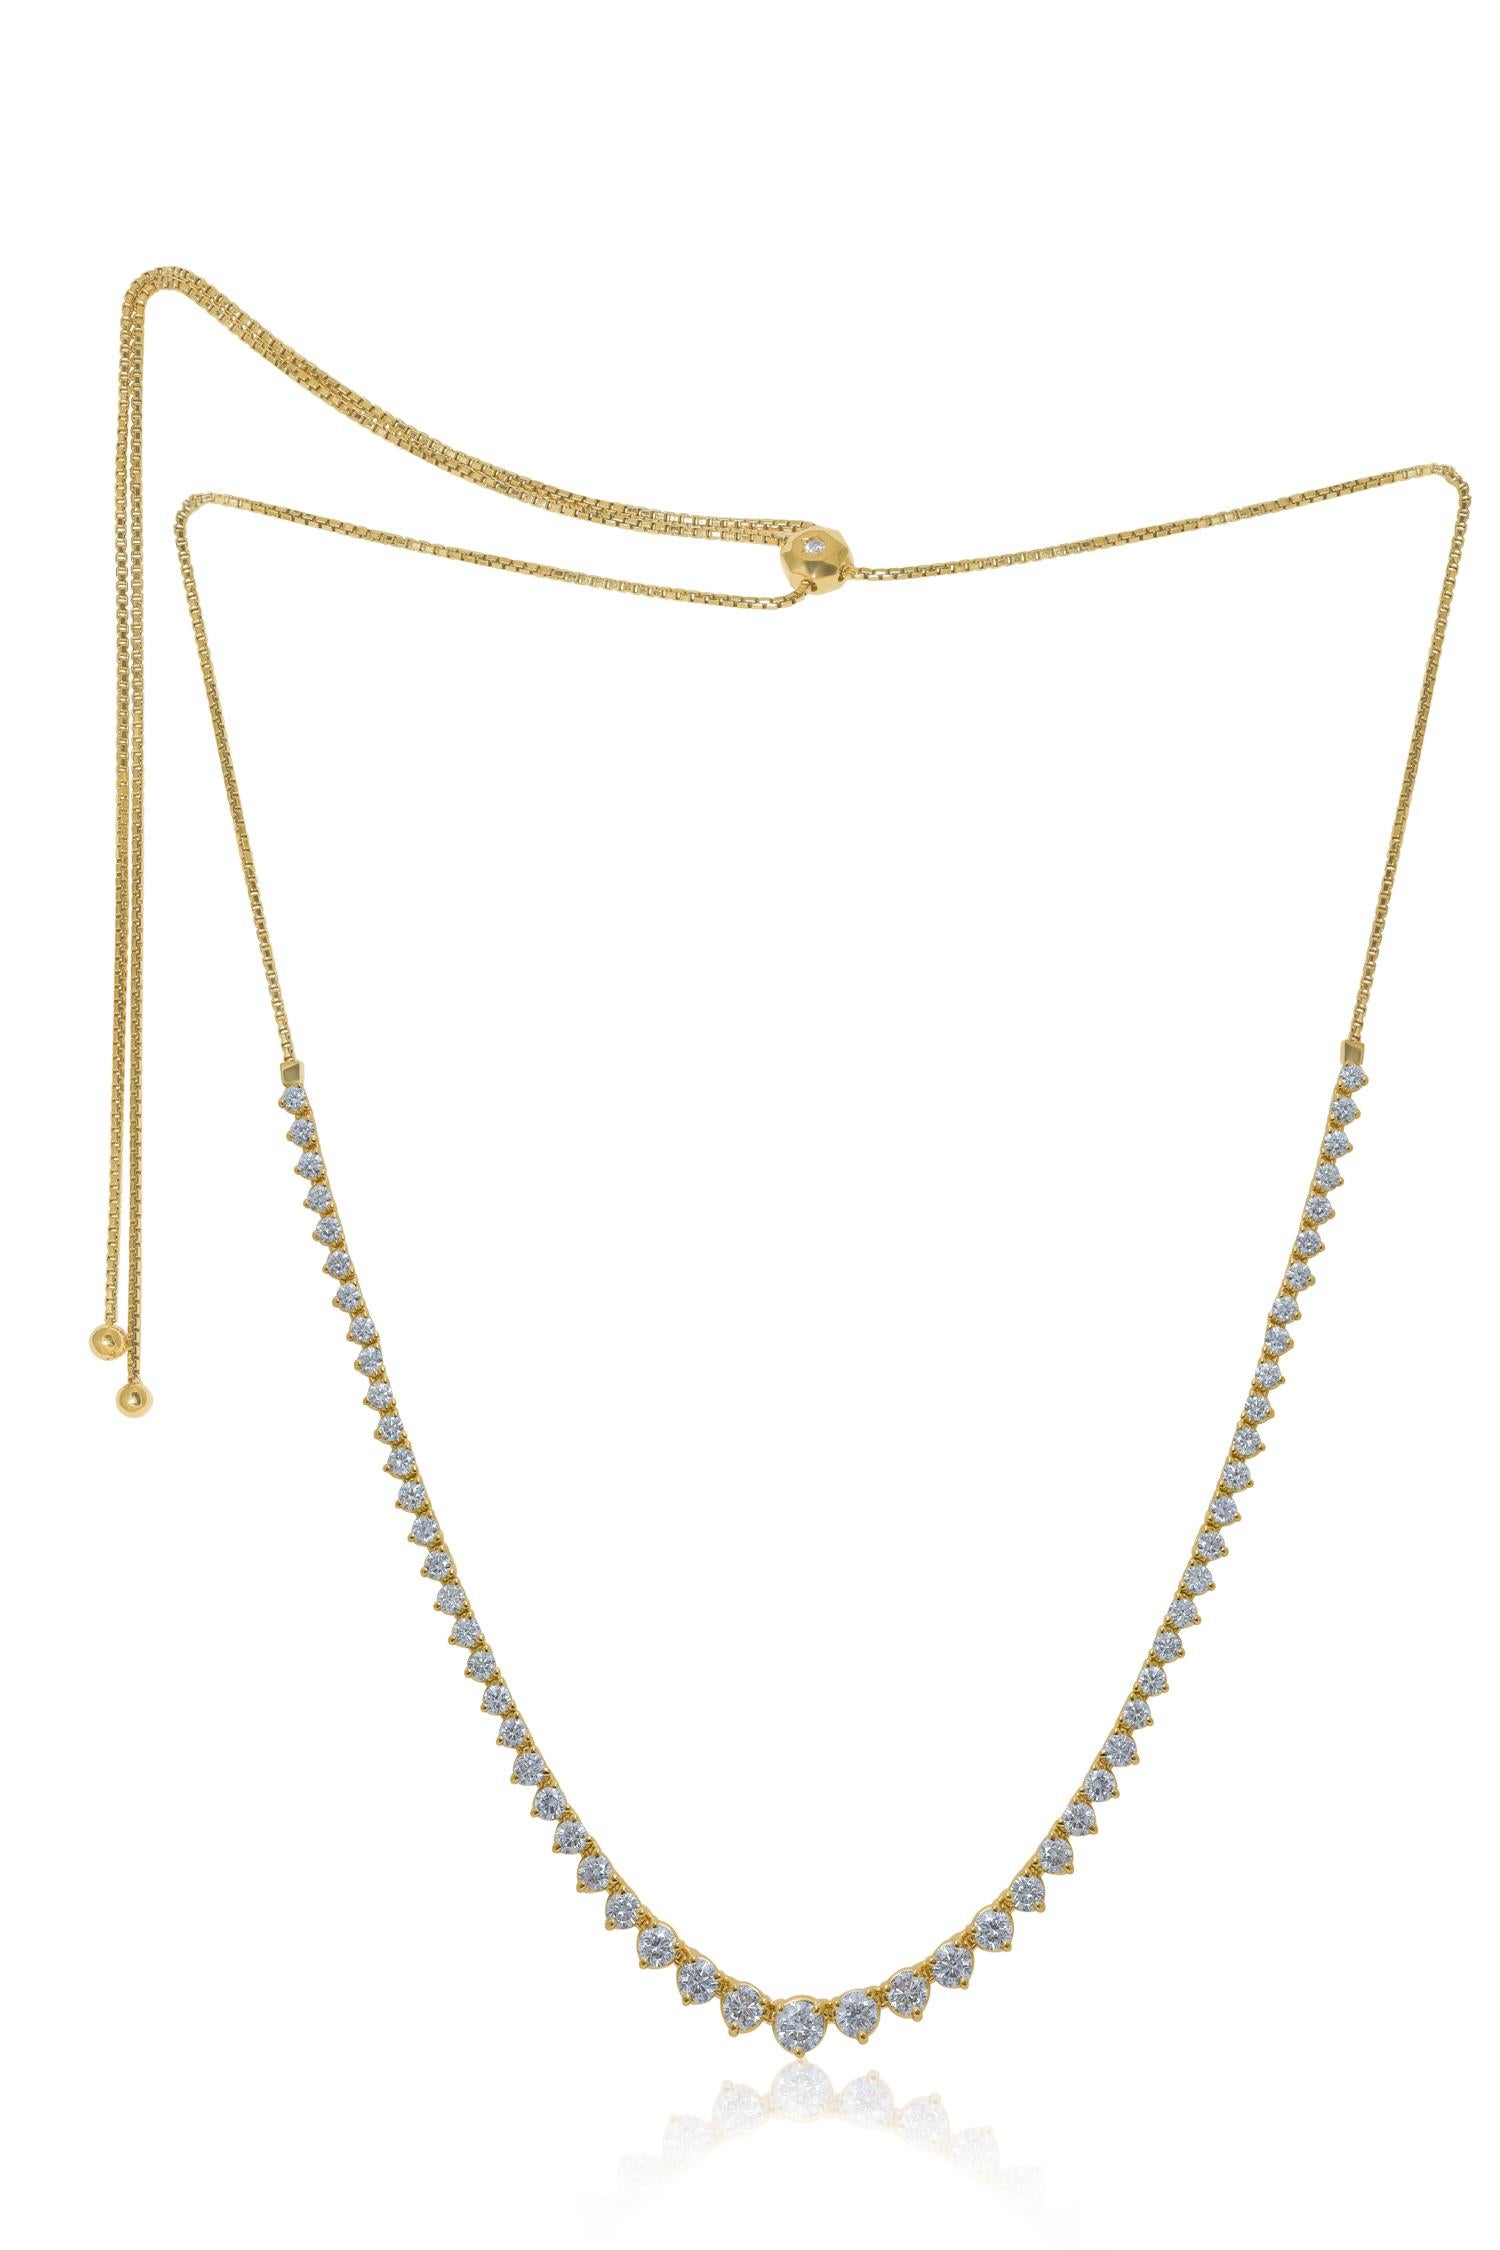 Custom 14k yellow gold graduated half way bolo tennis necklace featuring 3.50 cts round diamonds 3 prong setting 14-32